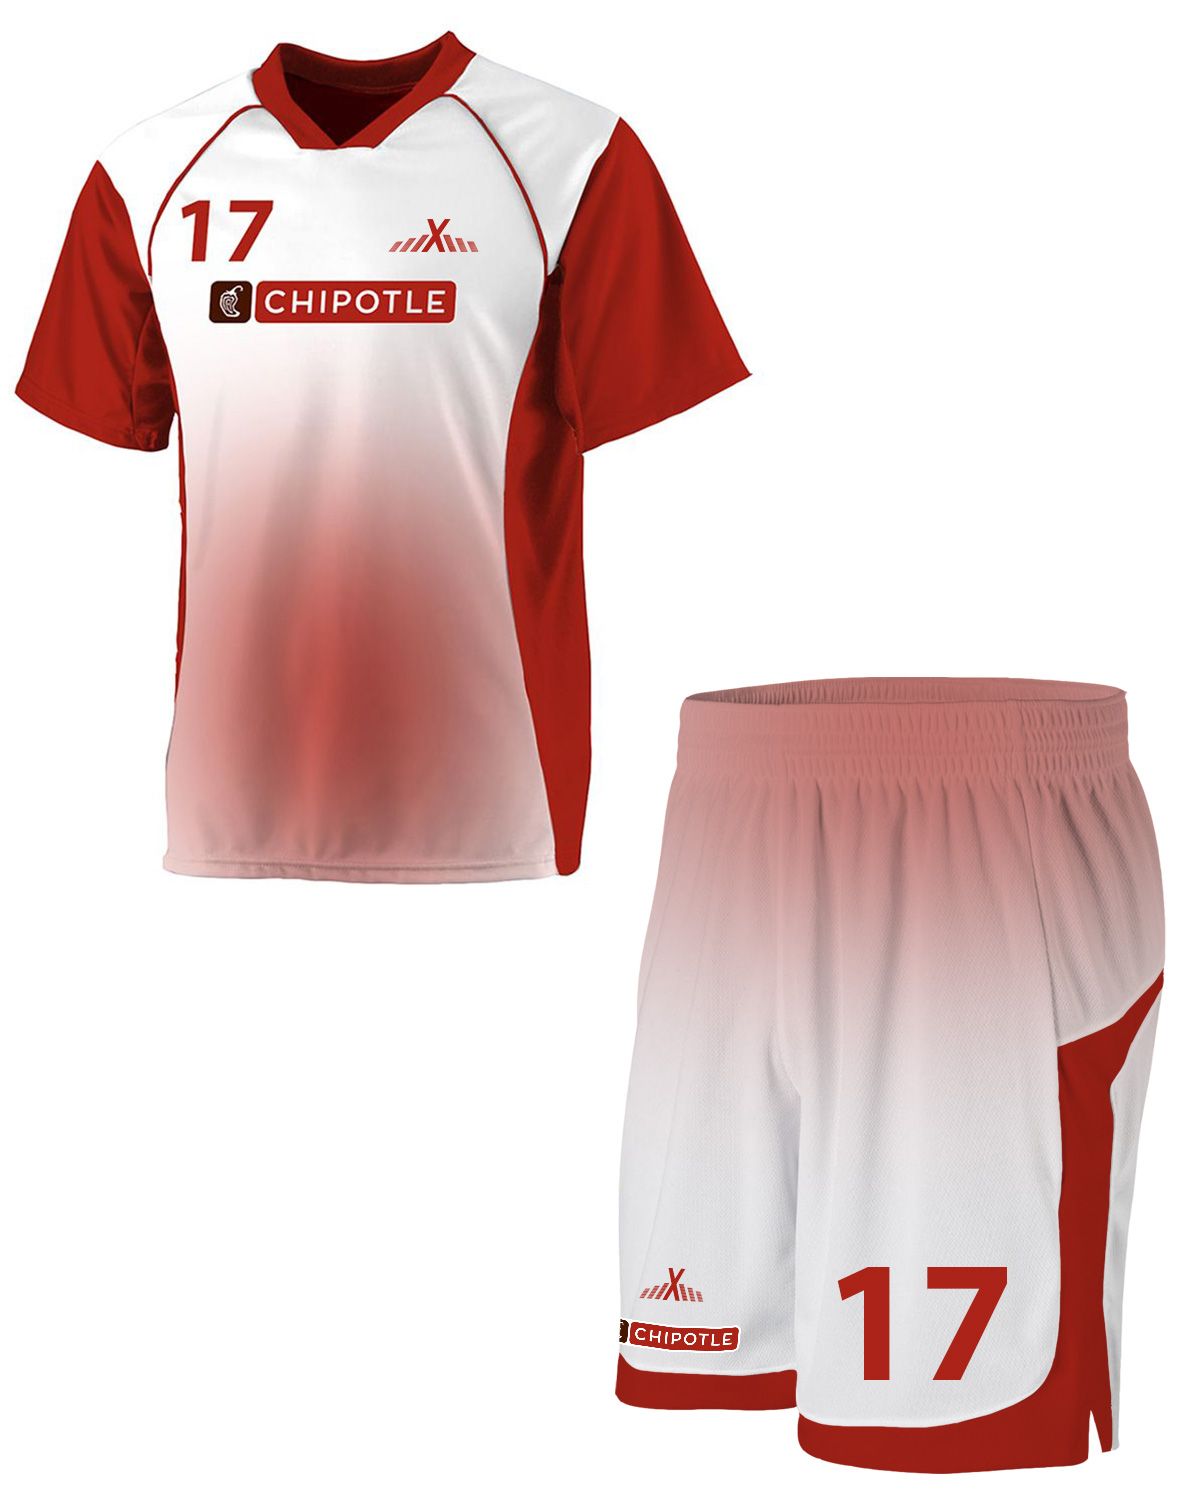 Soccer Uniforms:$17 each Jersey and shorts 